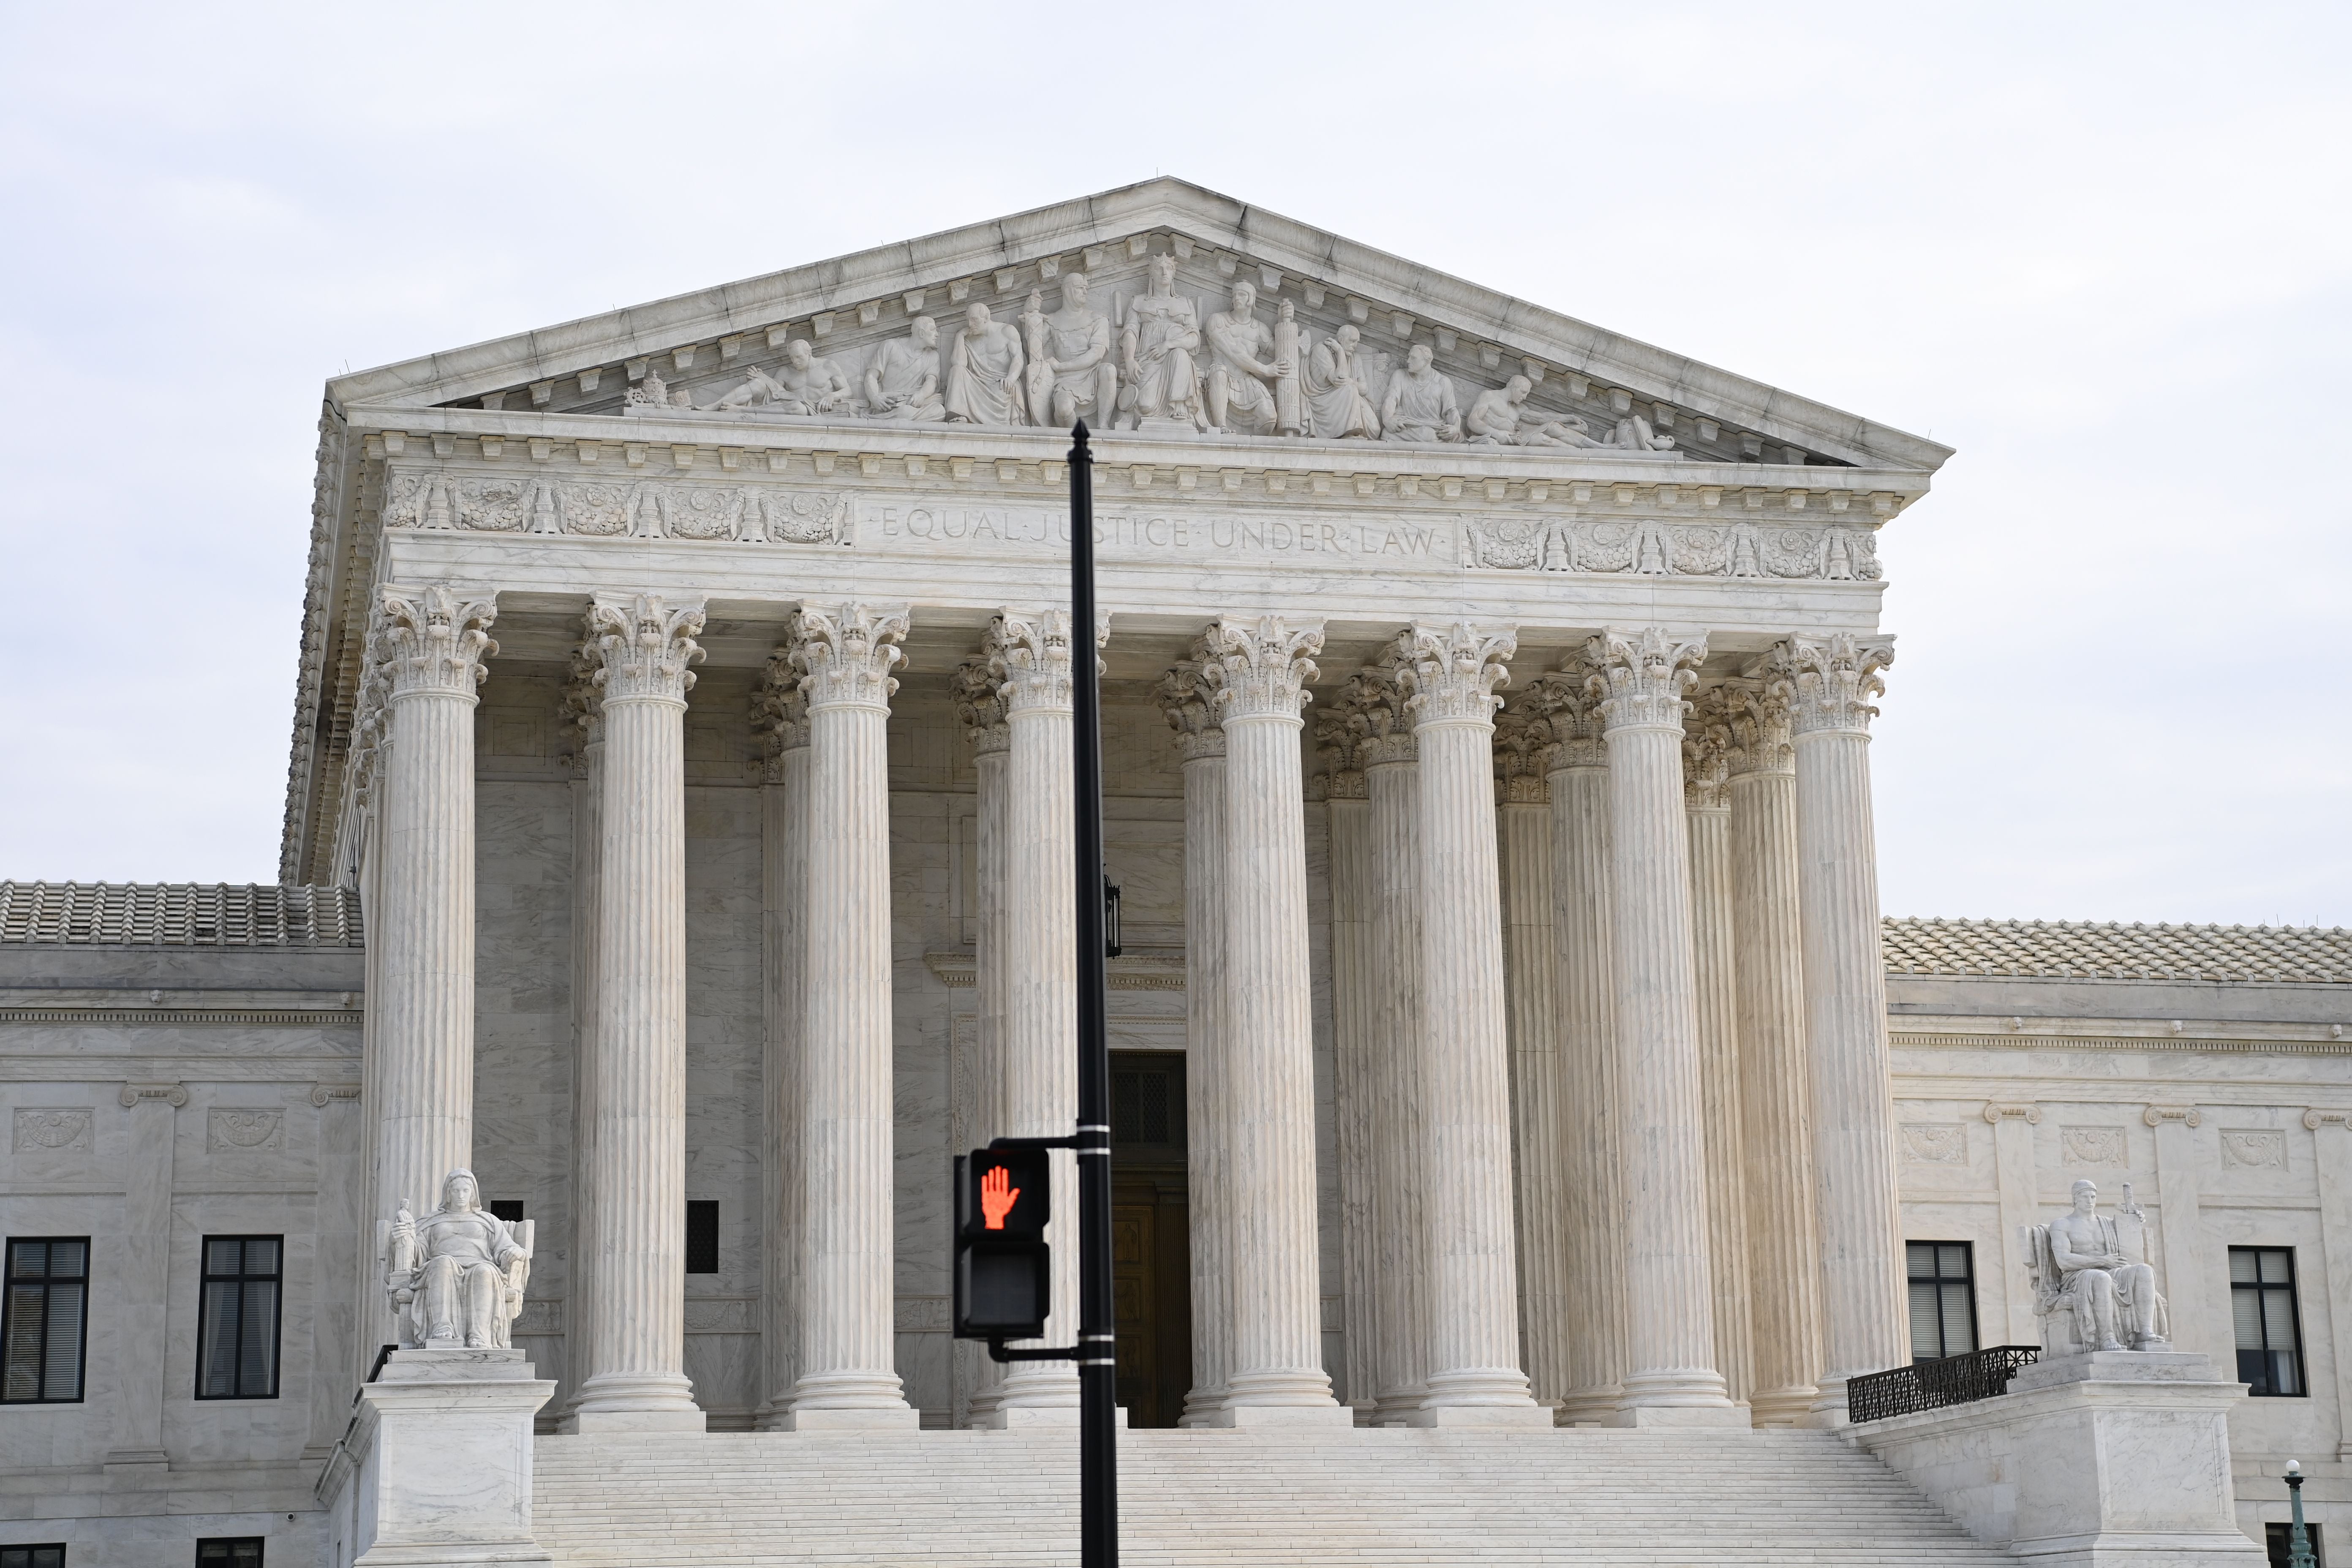 File Image: The US Supreme Court is seen in Washington, DC on 7 December 2020